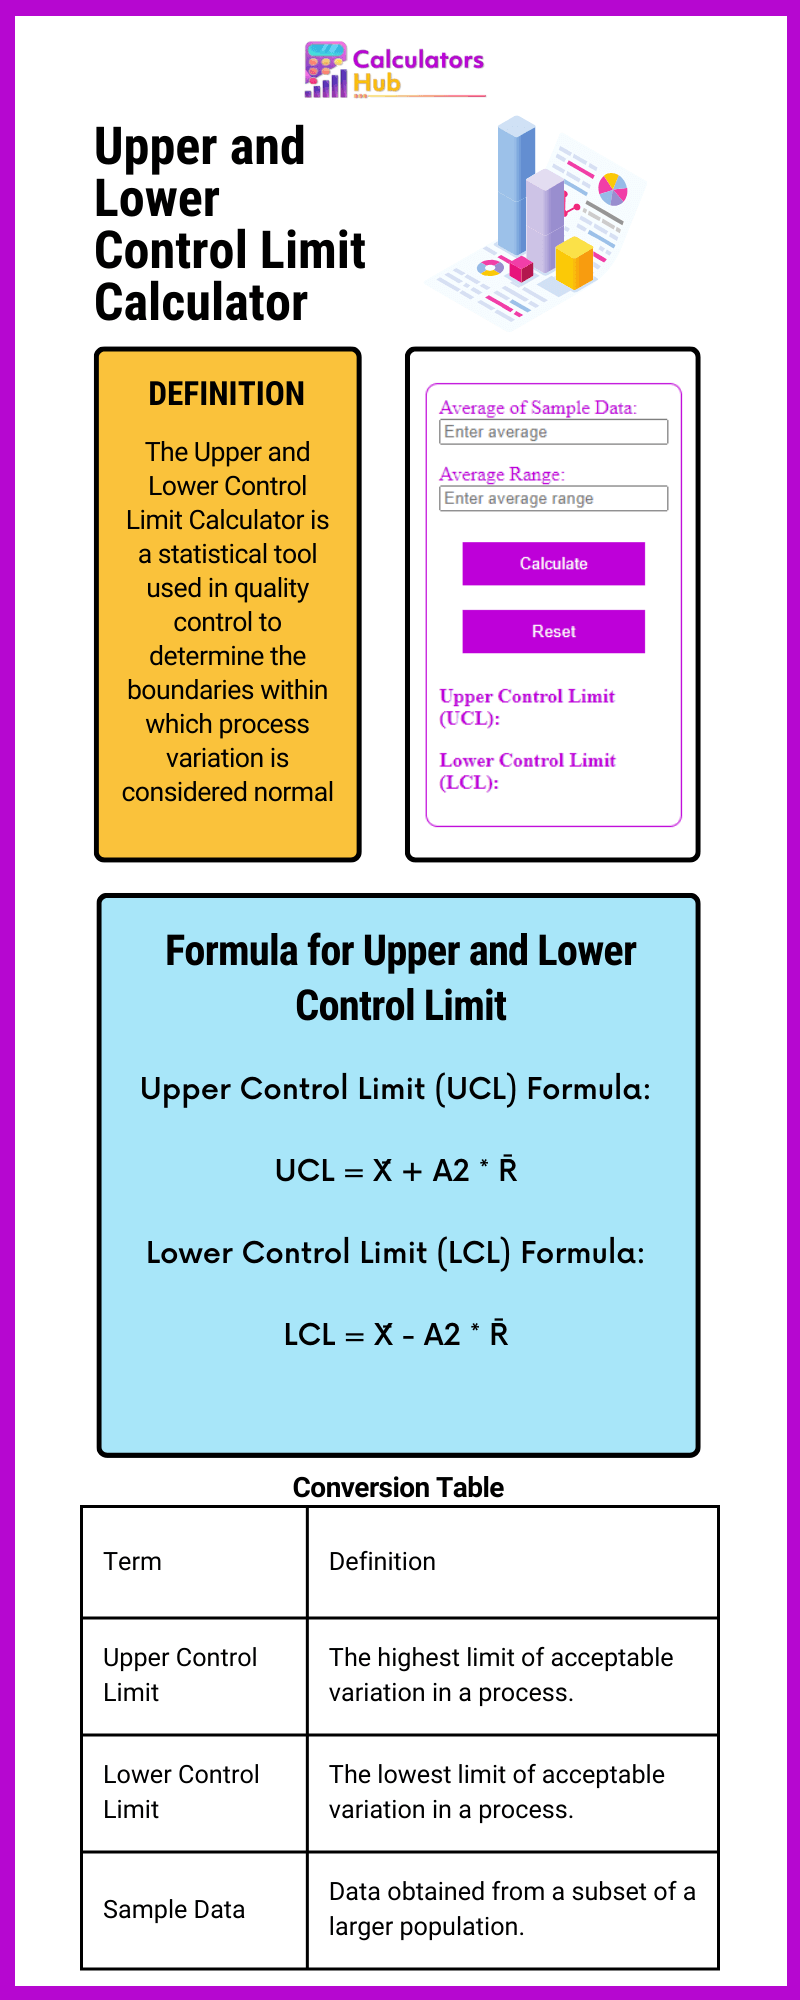 Upper and Lower Control Limit Calculator